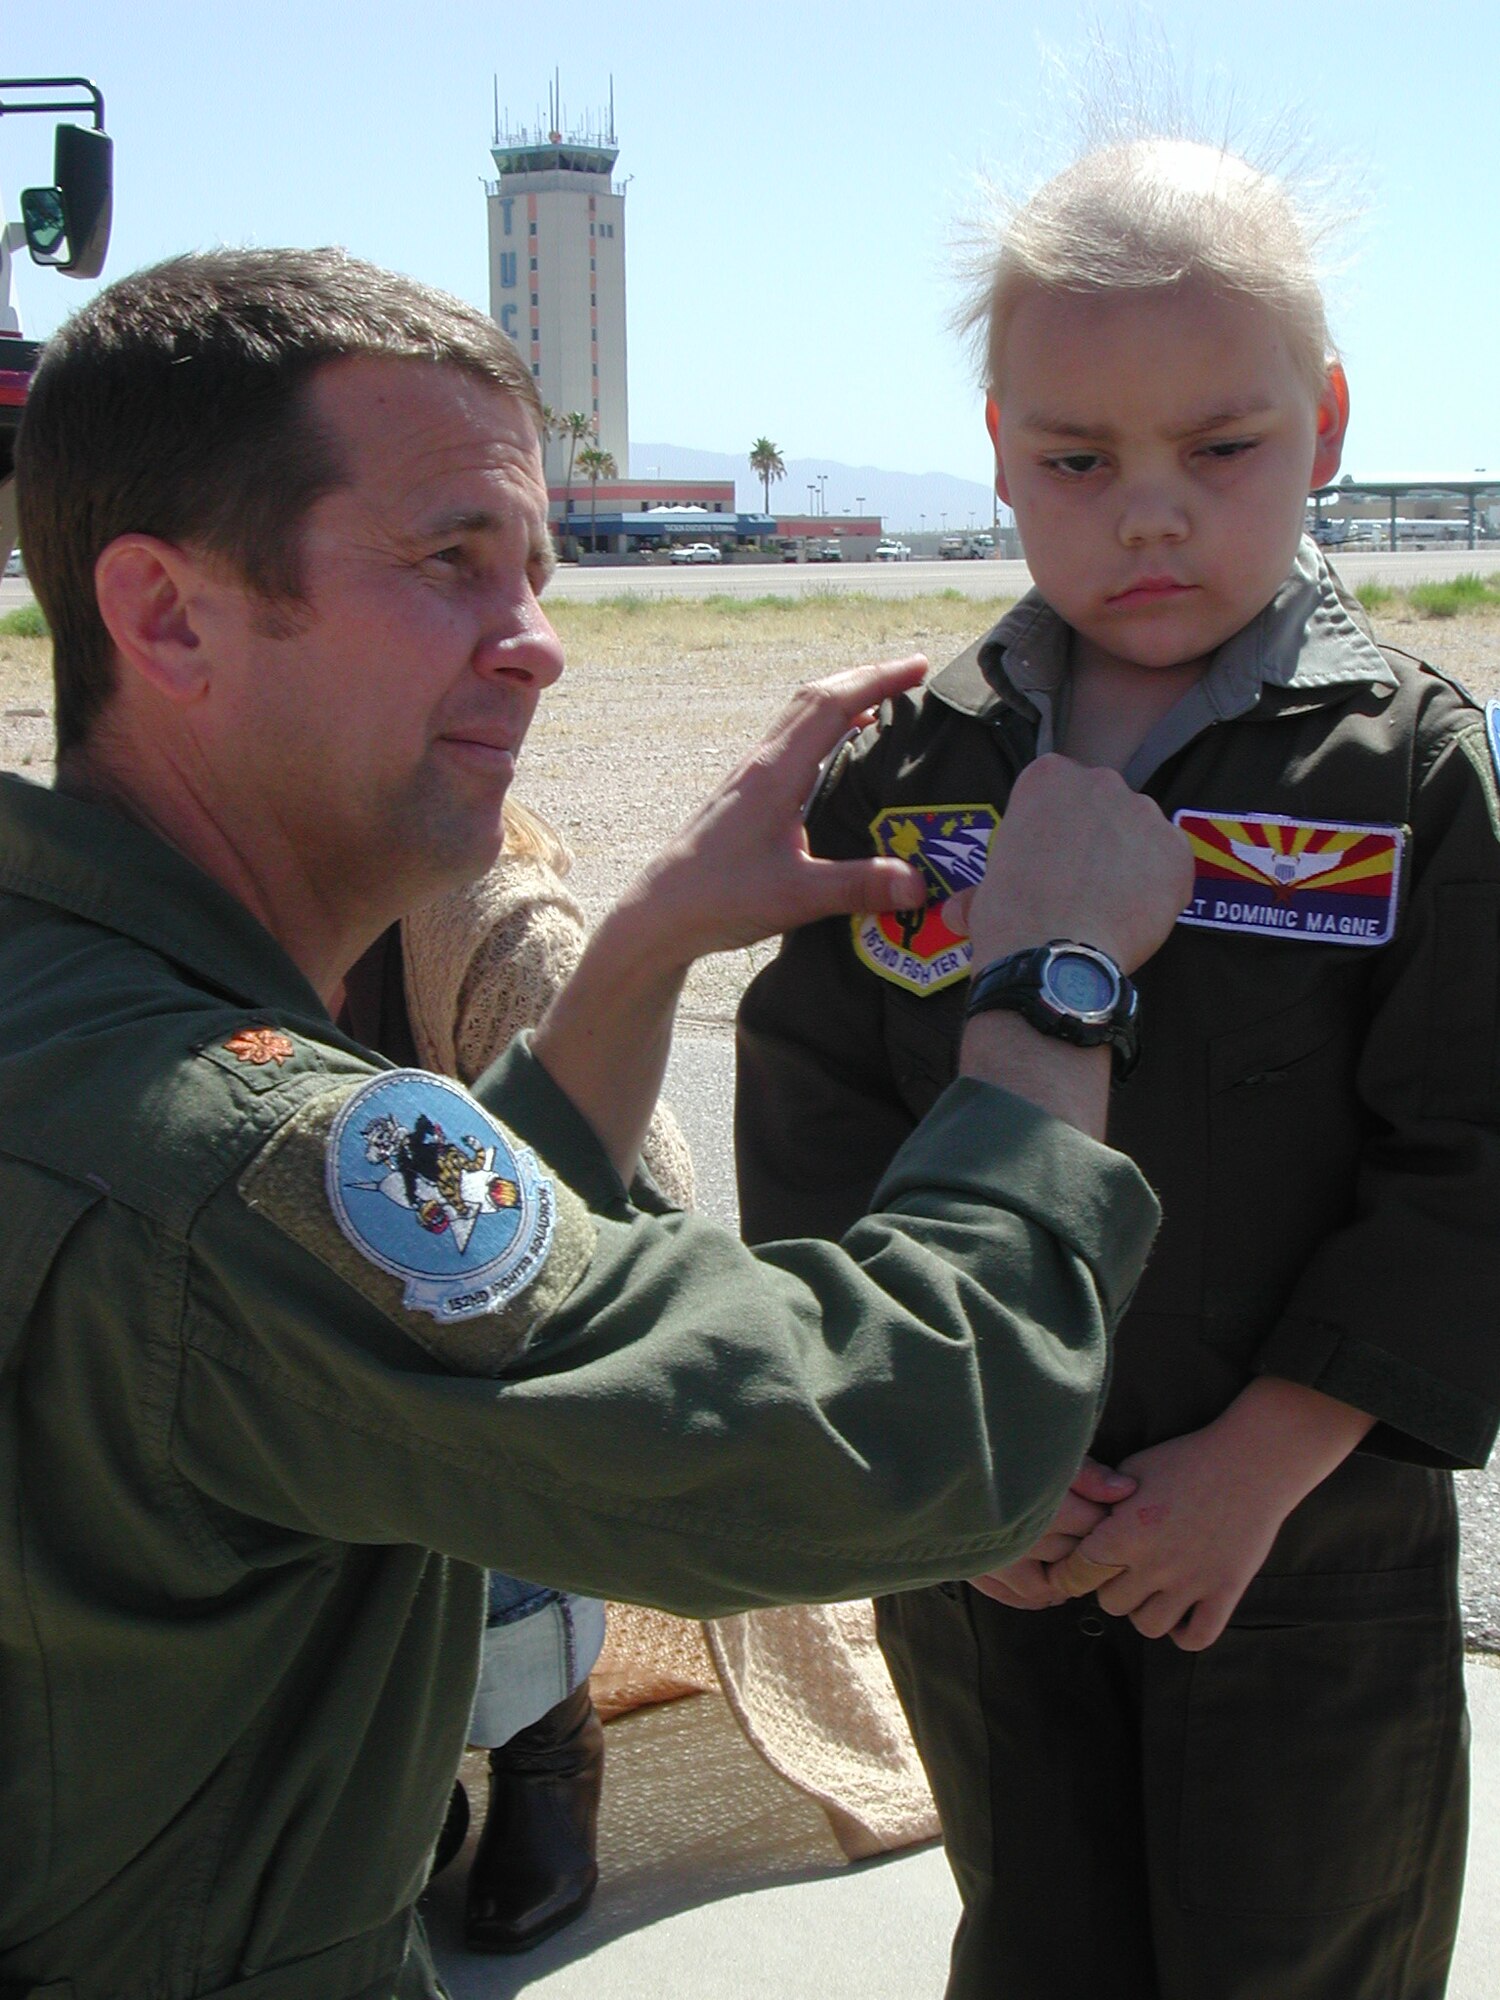 Lt. Col. Scott Reinhold, then a major, puts the 162nd Fighter Wing patch on 6-year-old Dominic Magne’s flightsuit during his visit to the Arizona Guard unit April 17, 2007. Dominic, a leukemia patient from Flagstaff, Ariz., was introduced to Colonel Reinhold through Dream Factory, a nonprofit organization that grants dreams to critically ill children. Now an honorary member of the wing, his friendship with Reinhold has grown and his health has improved. (Air National Guard photo by Capt. Gabe Johnson)